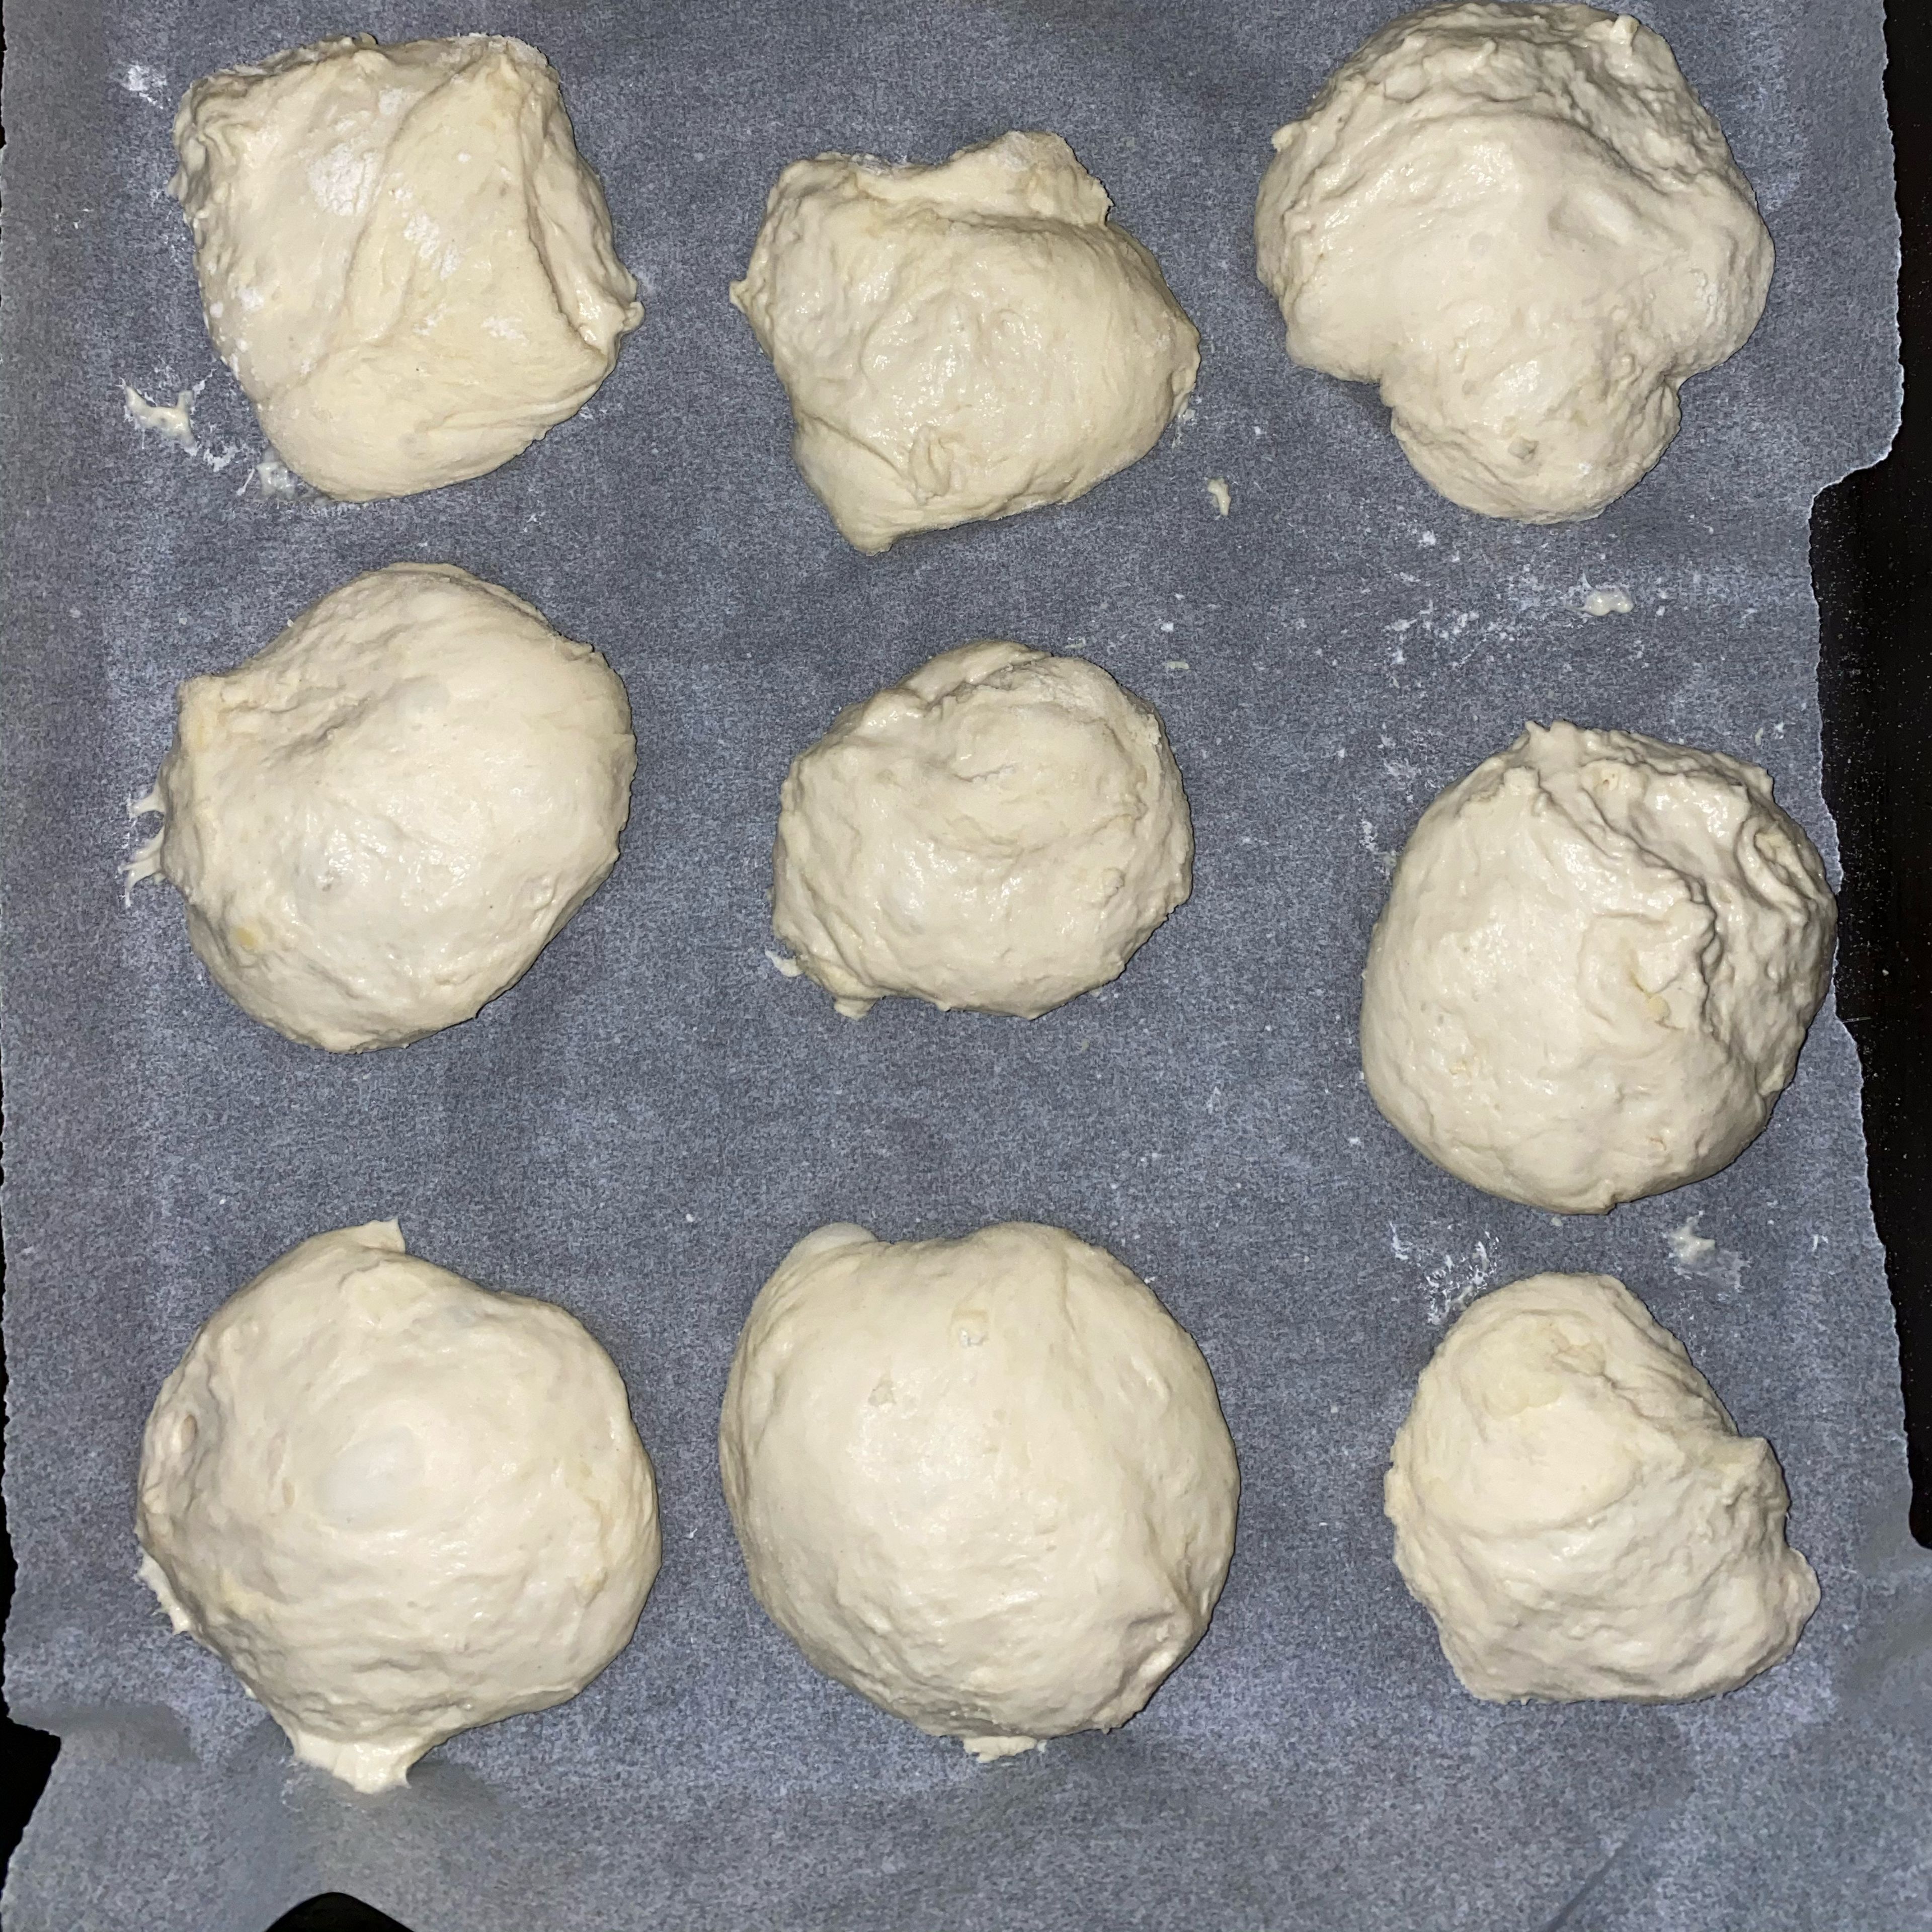 Knead the dough on a generously floured surface for around a minute, then shape as desired. You can make small bread rolls, a big bread bowl, even a ciabatta, or a combination. Place the dough on a parchment lined baking tray and set aside to rest, uncovered, for around 15 minutes.